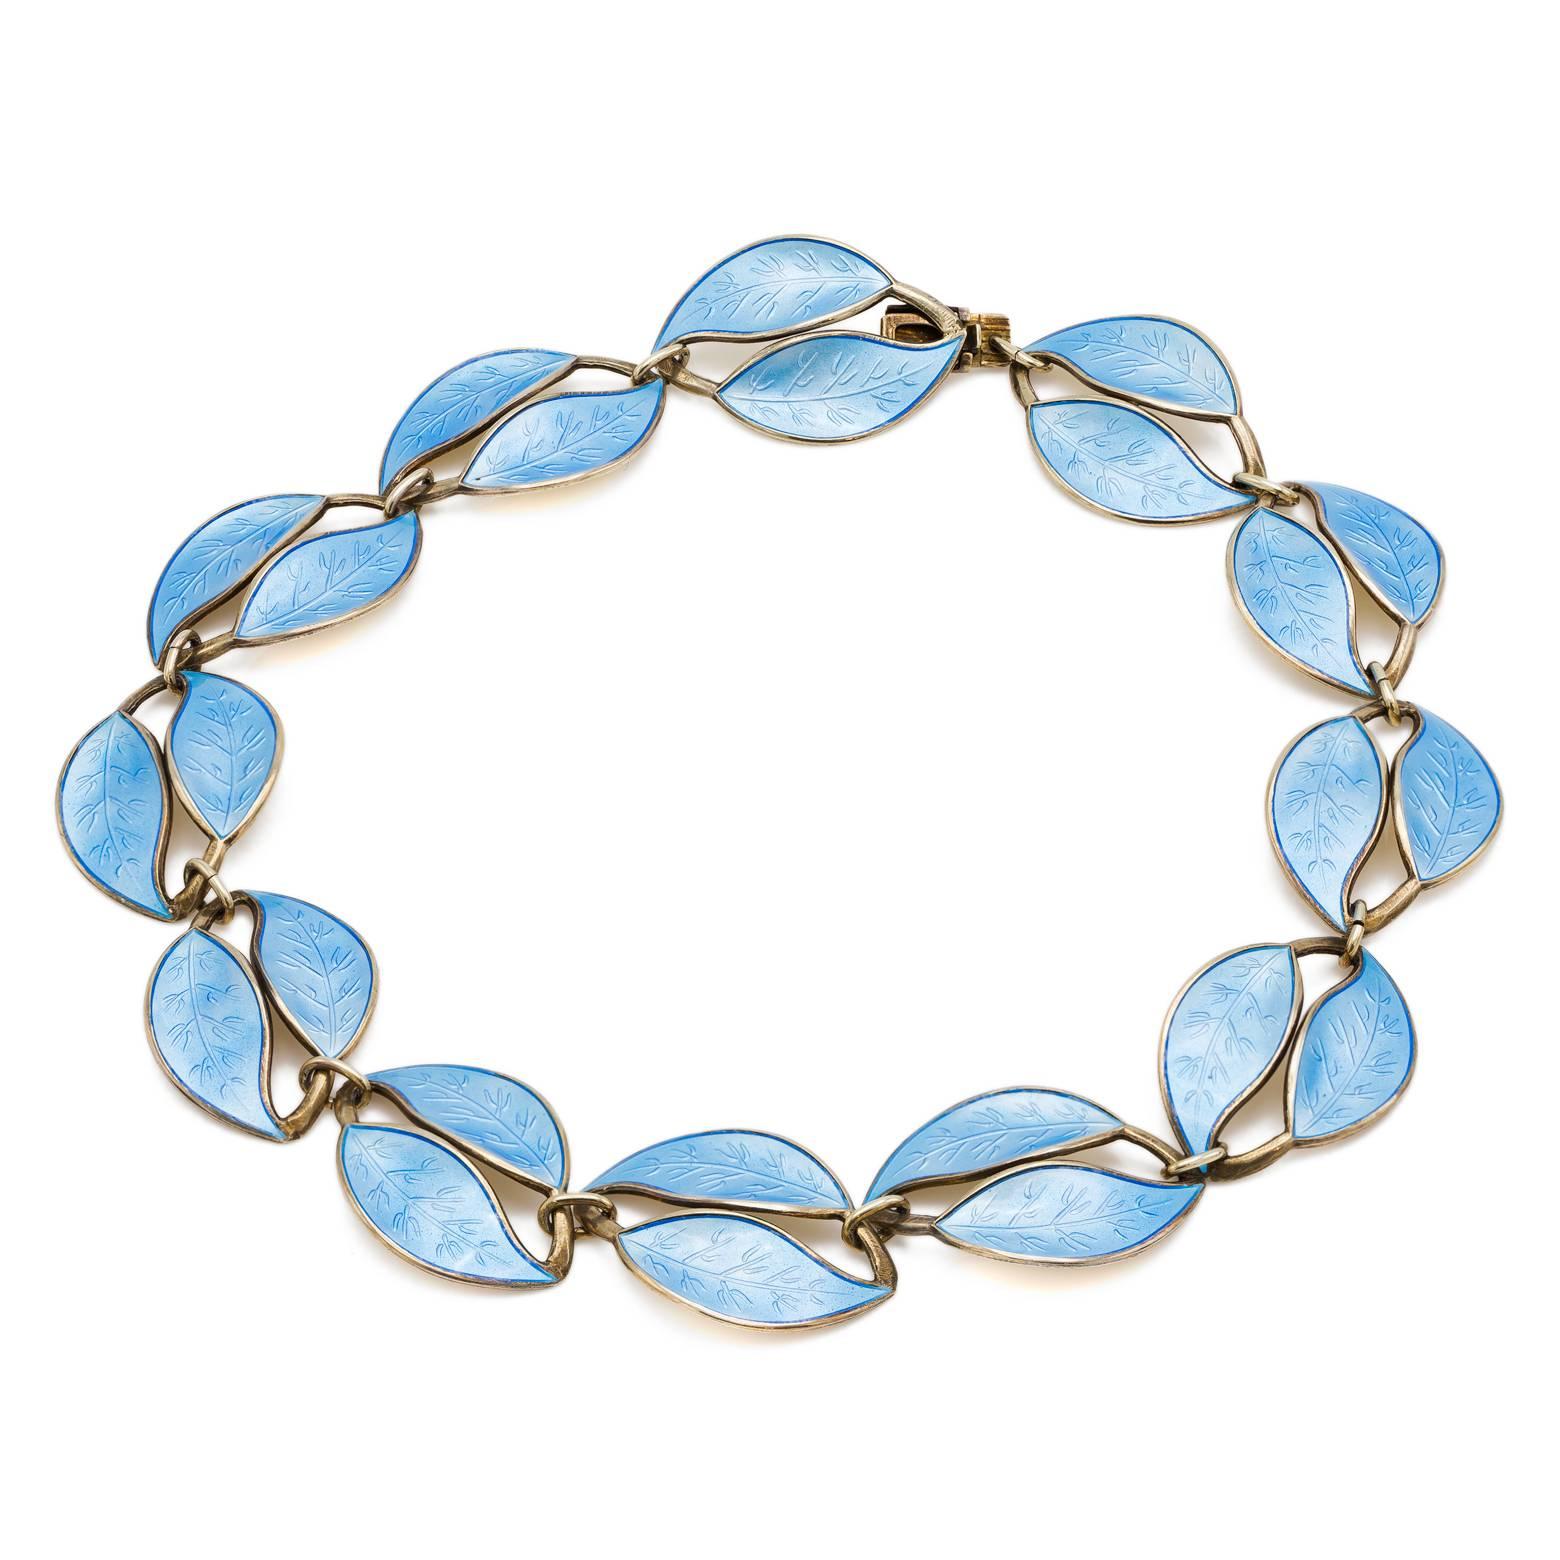 This stunning light blue Guilloche enamel necklace is made of leaves linked together in a delicate antique design. Set in sterling silver and a masterpiece! Inquire about our complete set. 